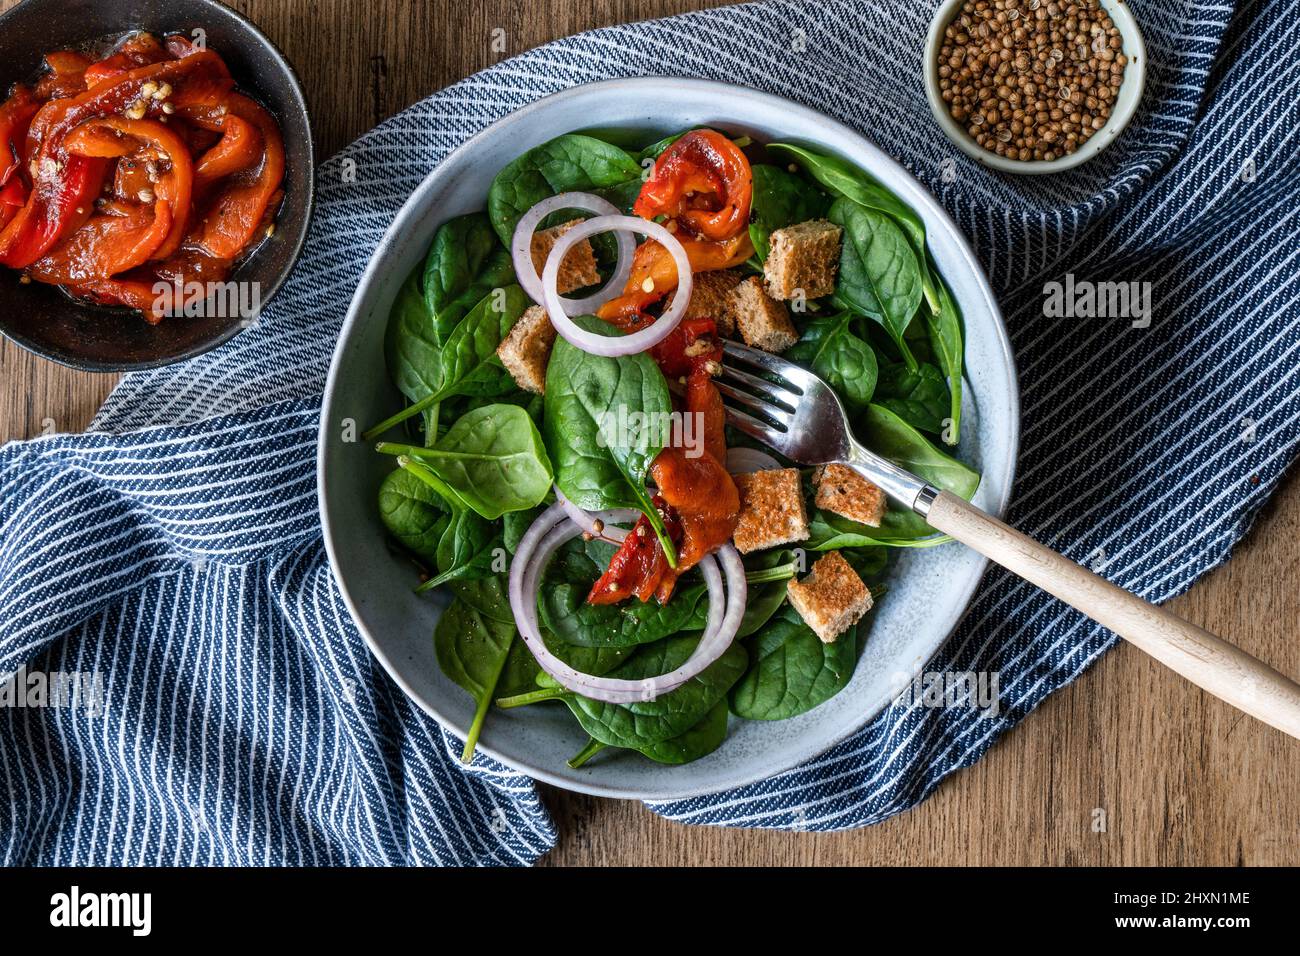 Healthy spinach salad with roasted red pepper on rustic wooden table. Stock Photo